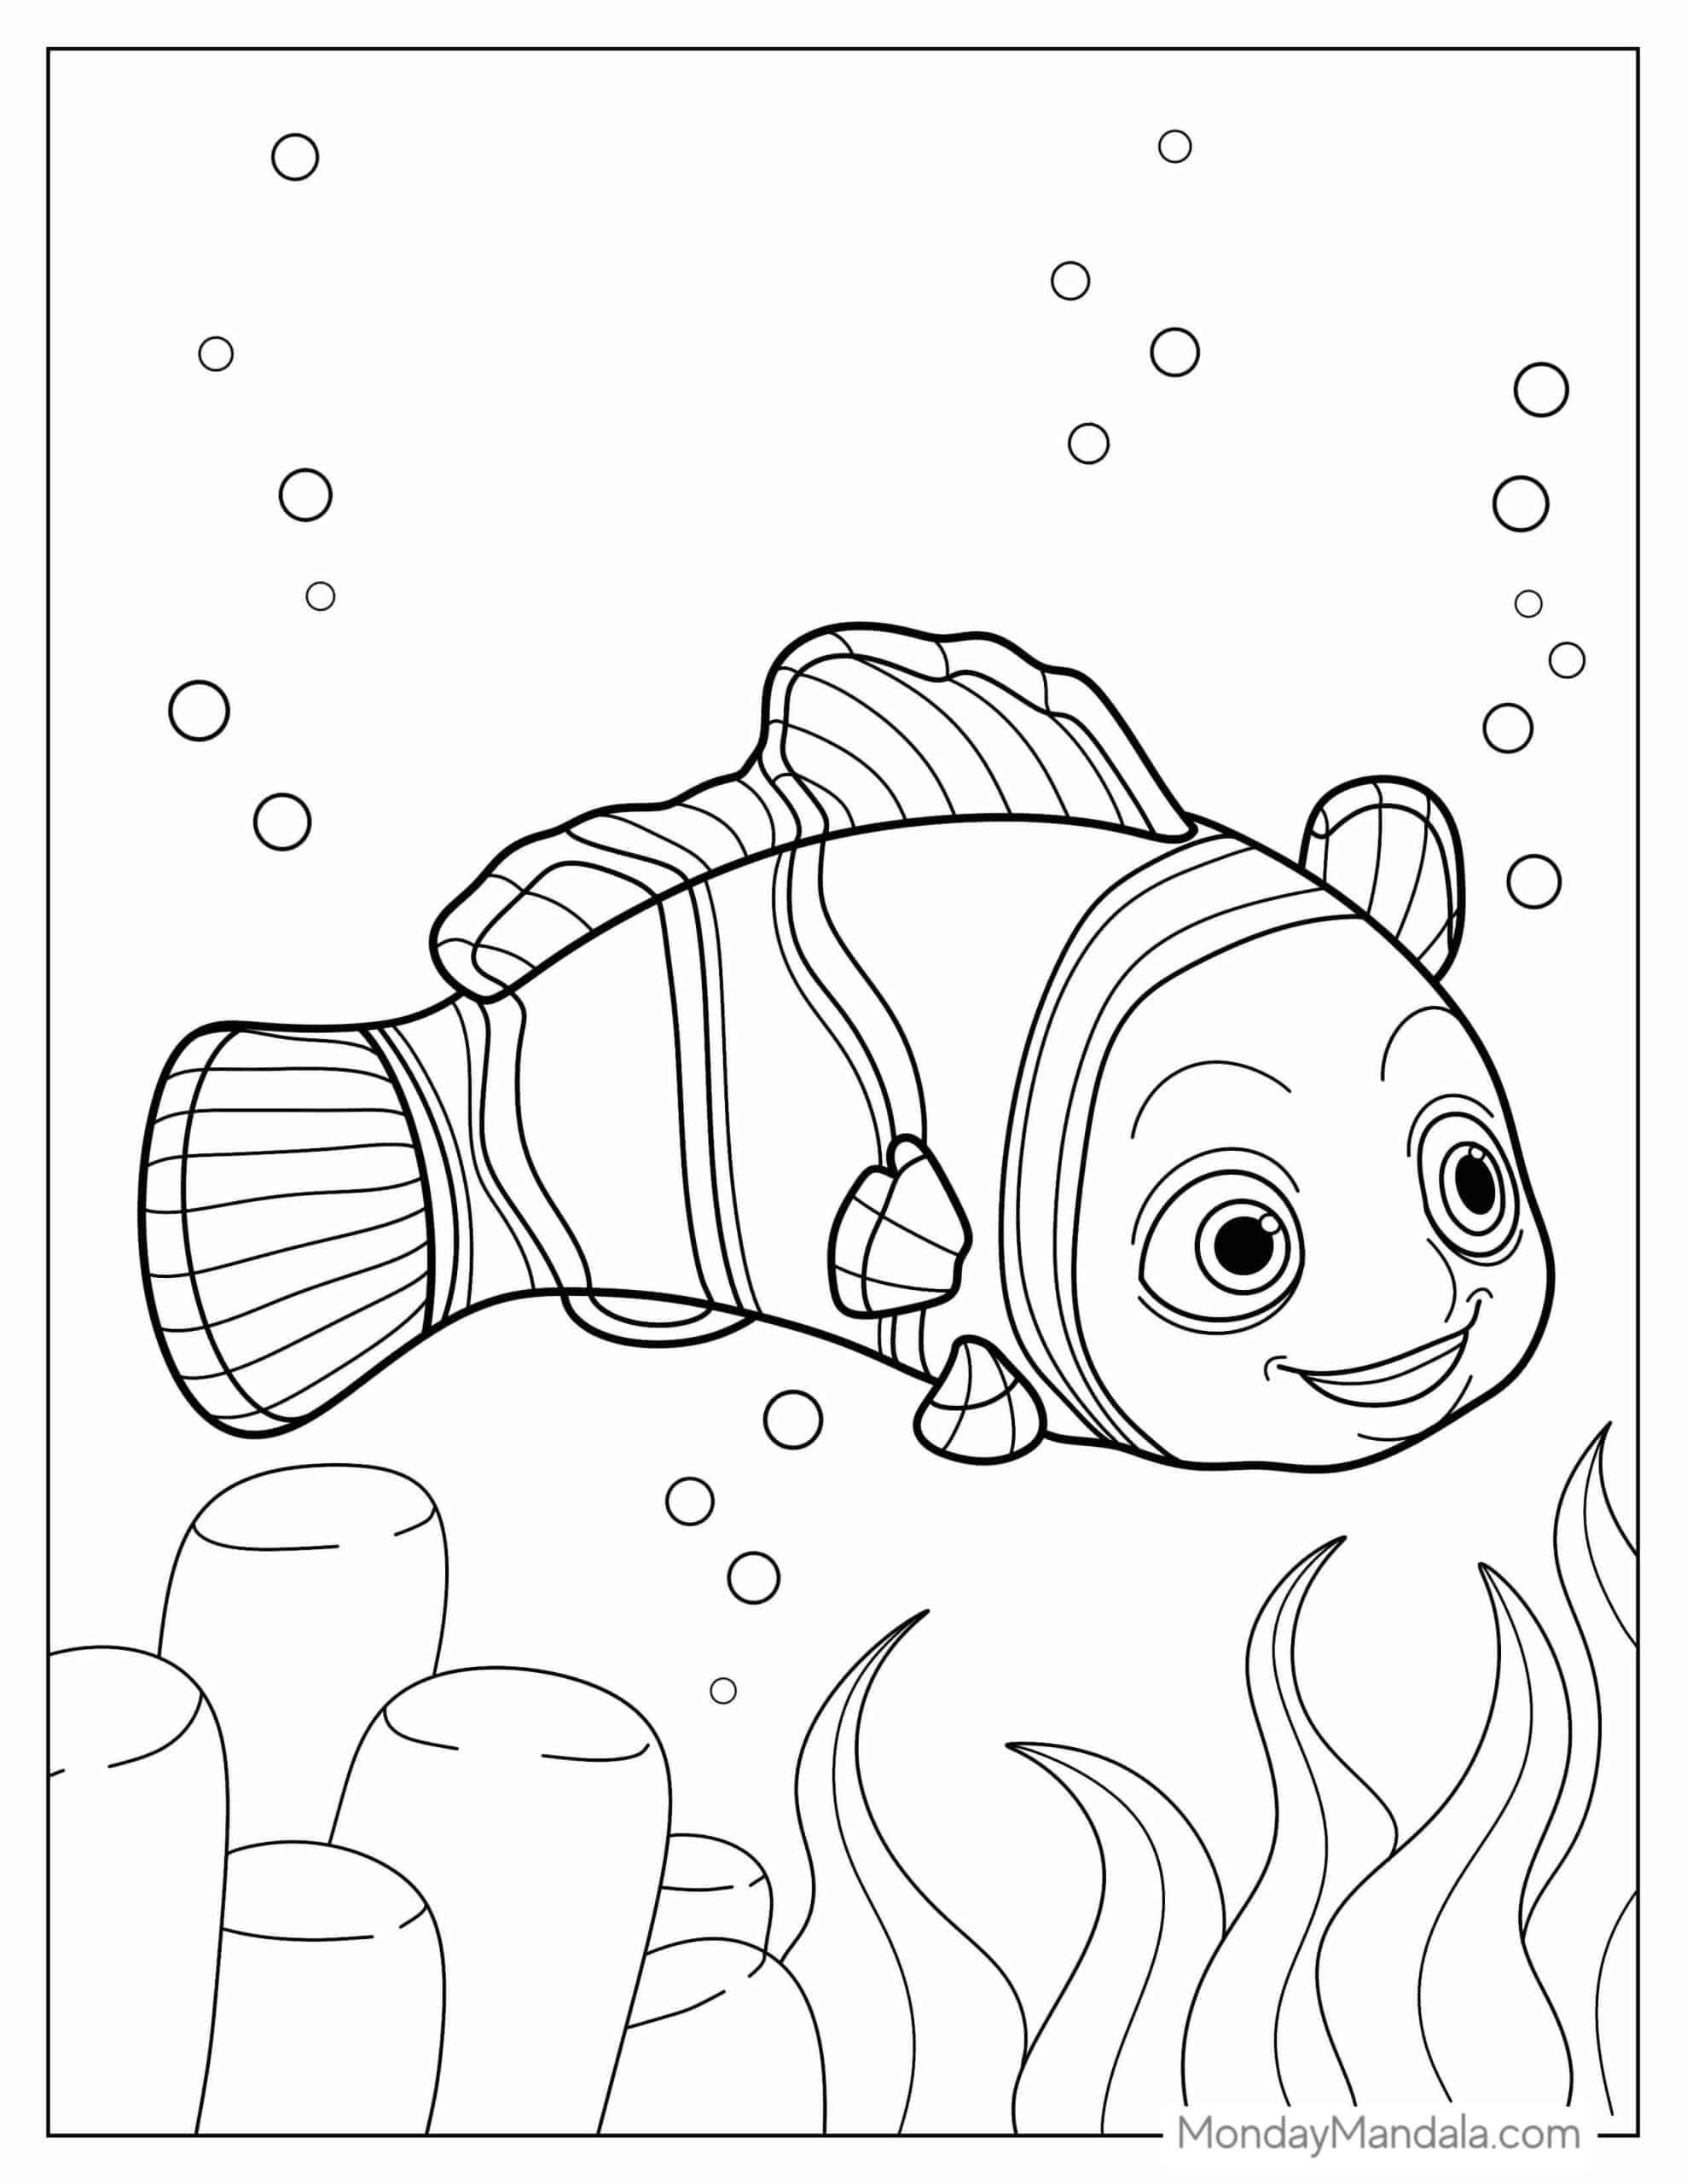 Finding nemo coloring pages free pdf printables finding nemo coloring pages nemo coloring pages coloring pages